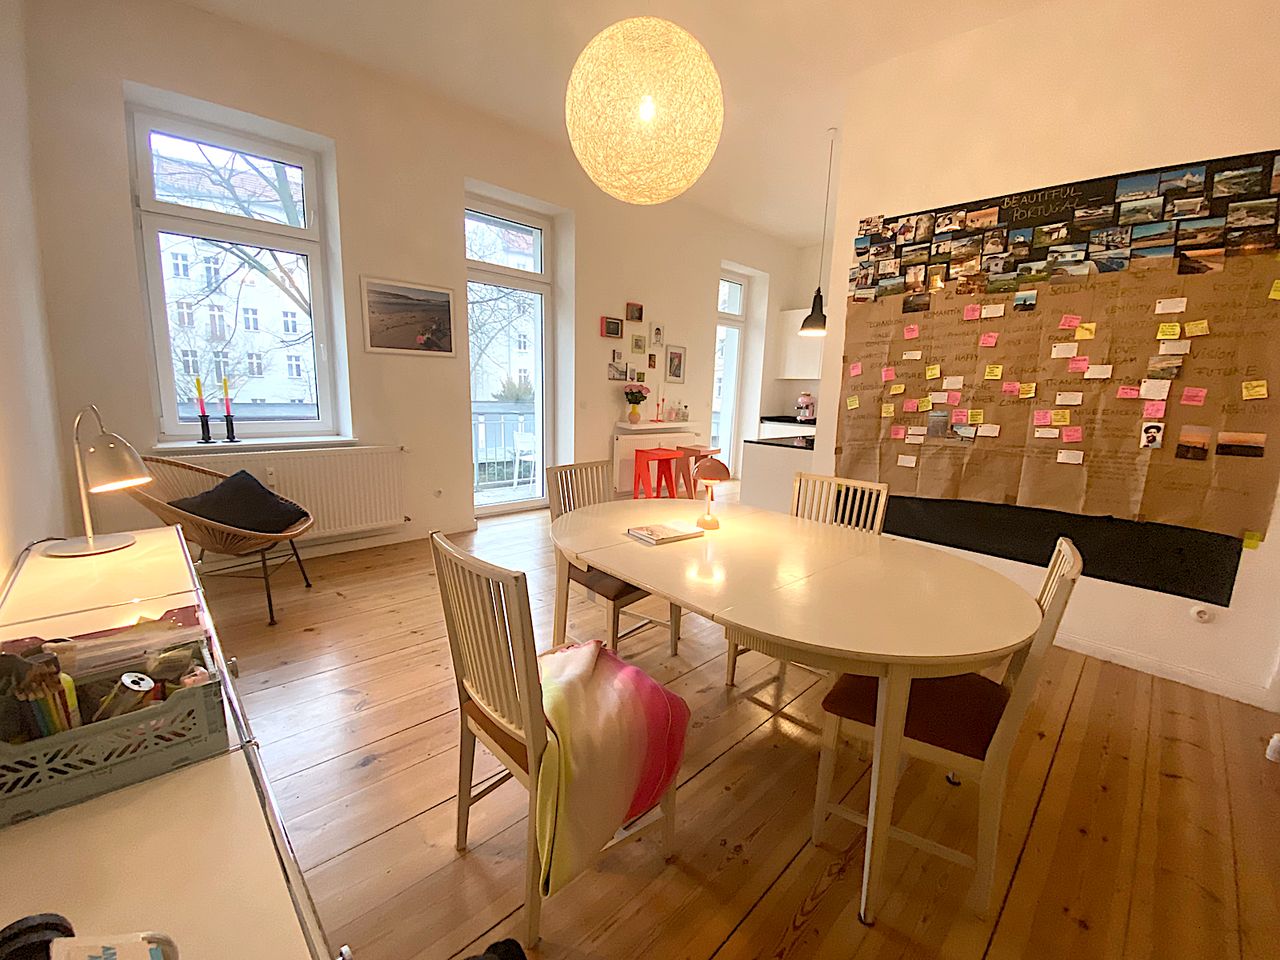 URBAN LIVING - Stylishly furnished design apartment. A quiet oasis in the vibrant area Friedrichshain.